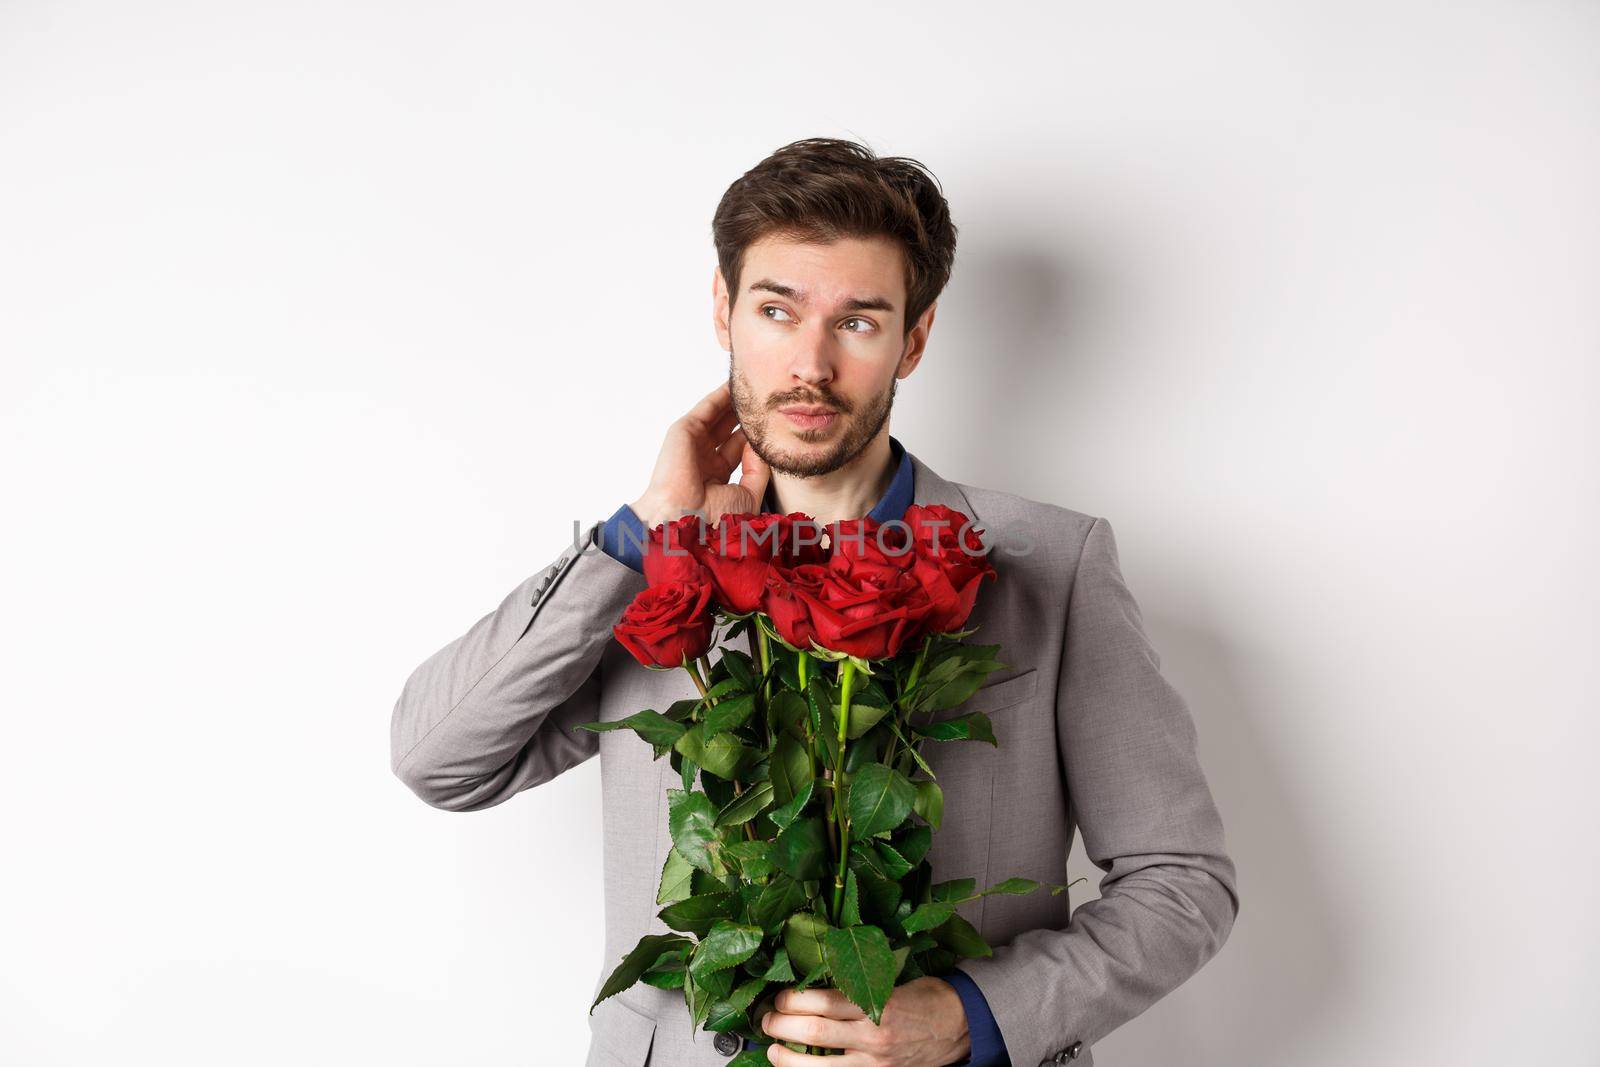 Pensive young man in suit holding bouquet of flowers, waiting for date on Valentines day, standing over white background.